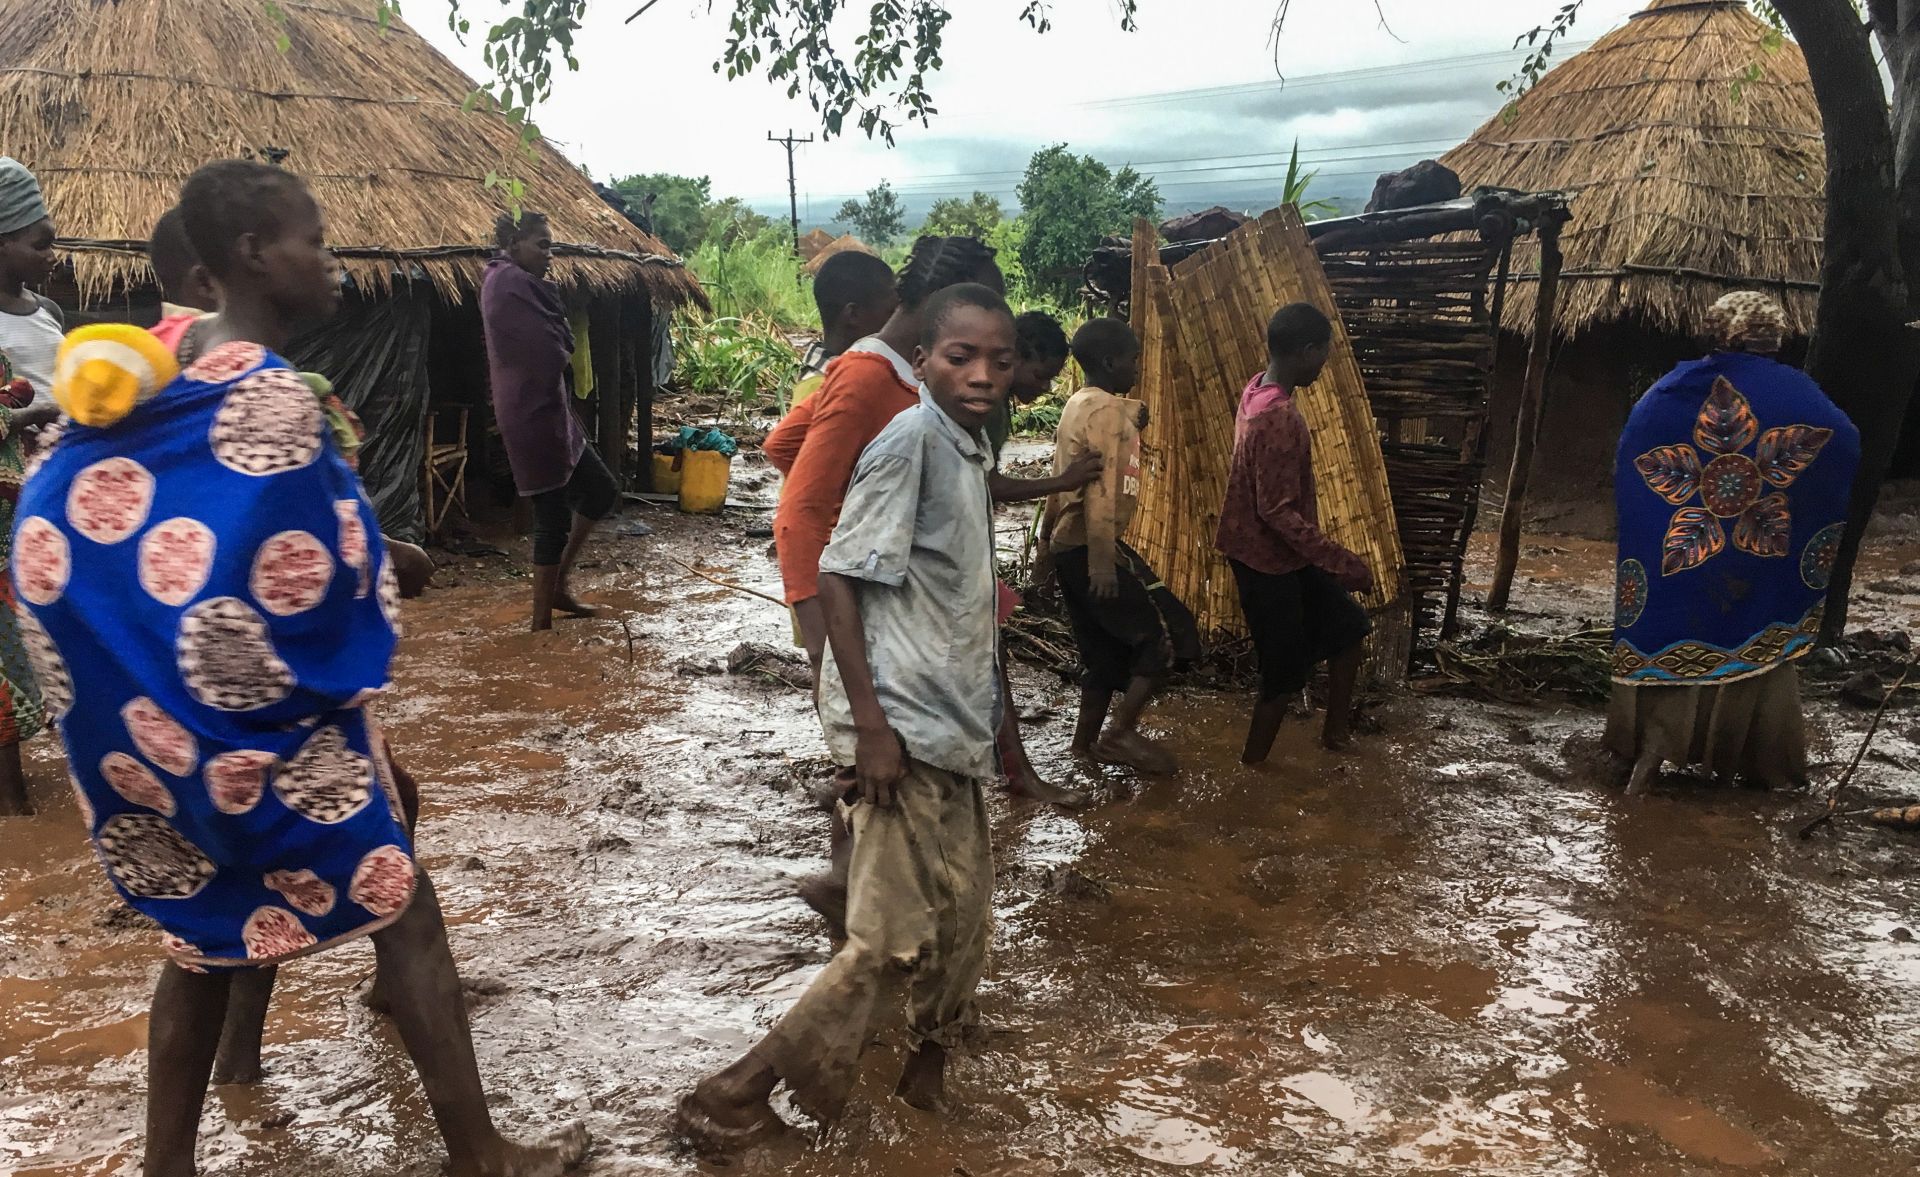 epa07446406 Inhabitants of Chiluvi, a village in central Mozambique, walk along a flooded and muddy street after Cyclone Idai and Floods that hit the region, in Nhamatanda, Mozambique, 13 March 2019 (Issued 18 March 2019). Chiluvo, together with Nhamatanda, Sofala, illustrates the tragedy that is experienced throughout the central region of Mozambique, especially in the provinces of Sofala and Manica, where there will already be between 73 and 84 confirmed deaths, according to official figures, leaving thousands in need of relief for remaining isolated in a flooded region.  EPA/ANDRE CATUEIRA BEST QUALITY AVAILABLE